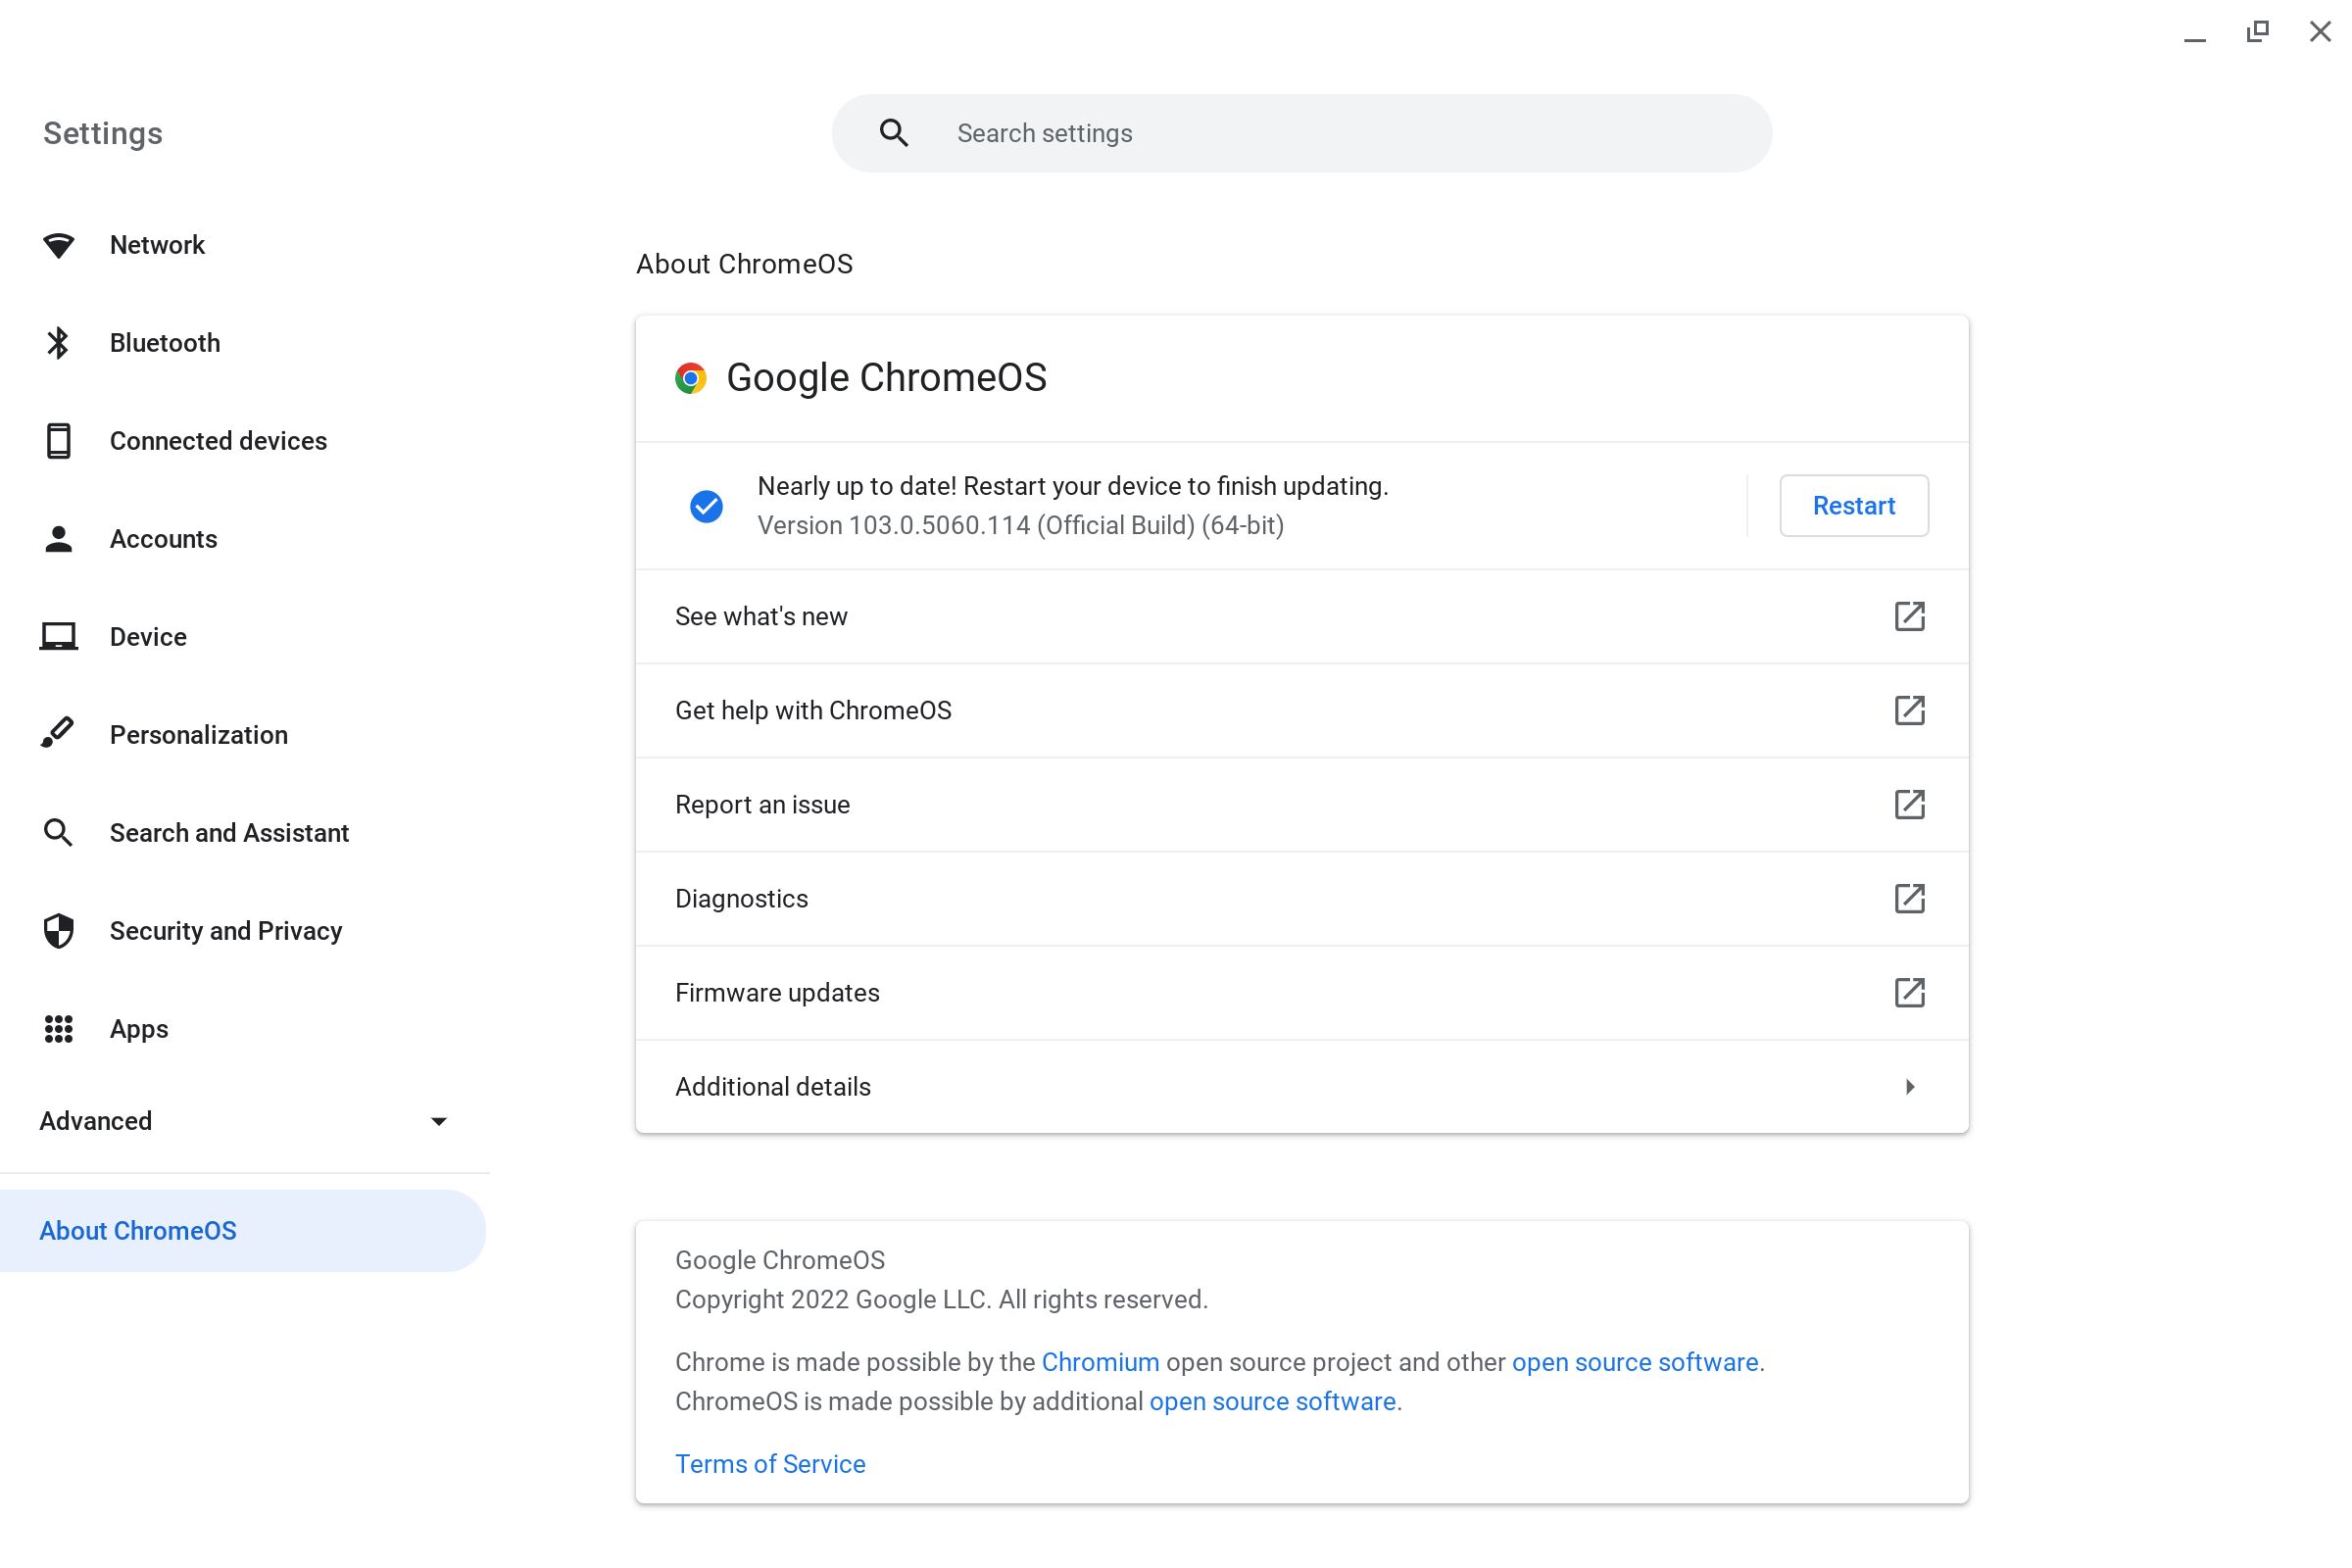 The Chromebook Settings app About ChromeOS section.